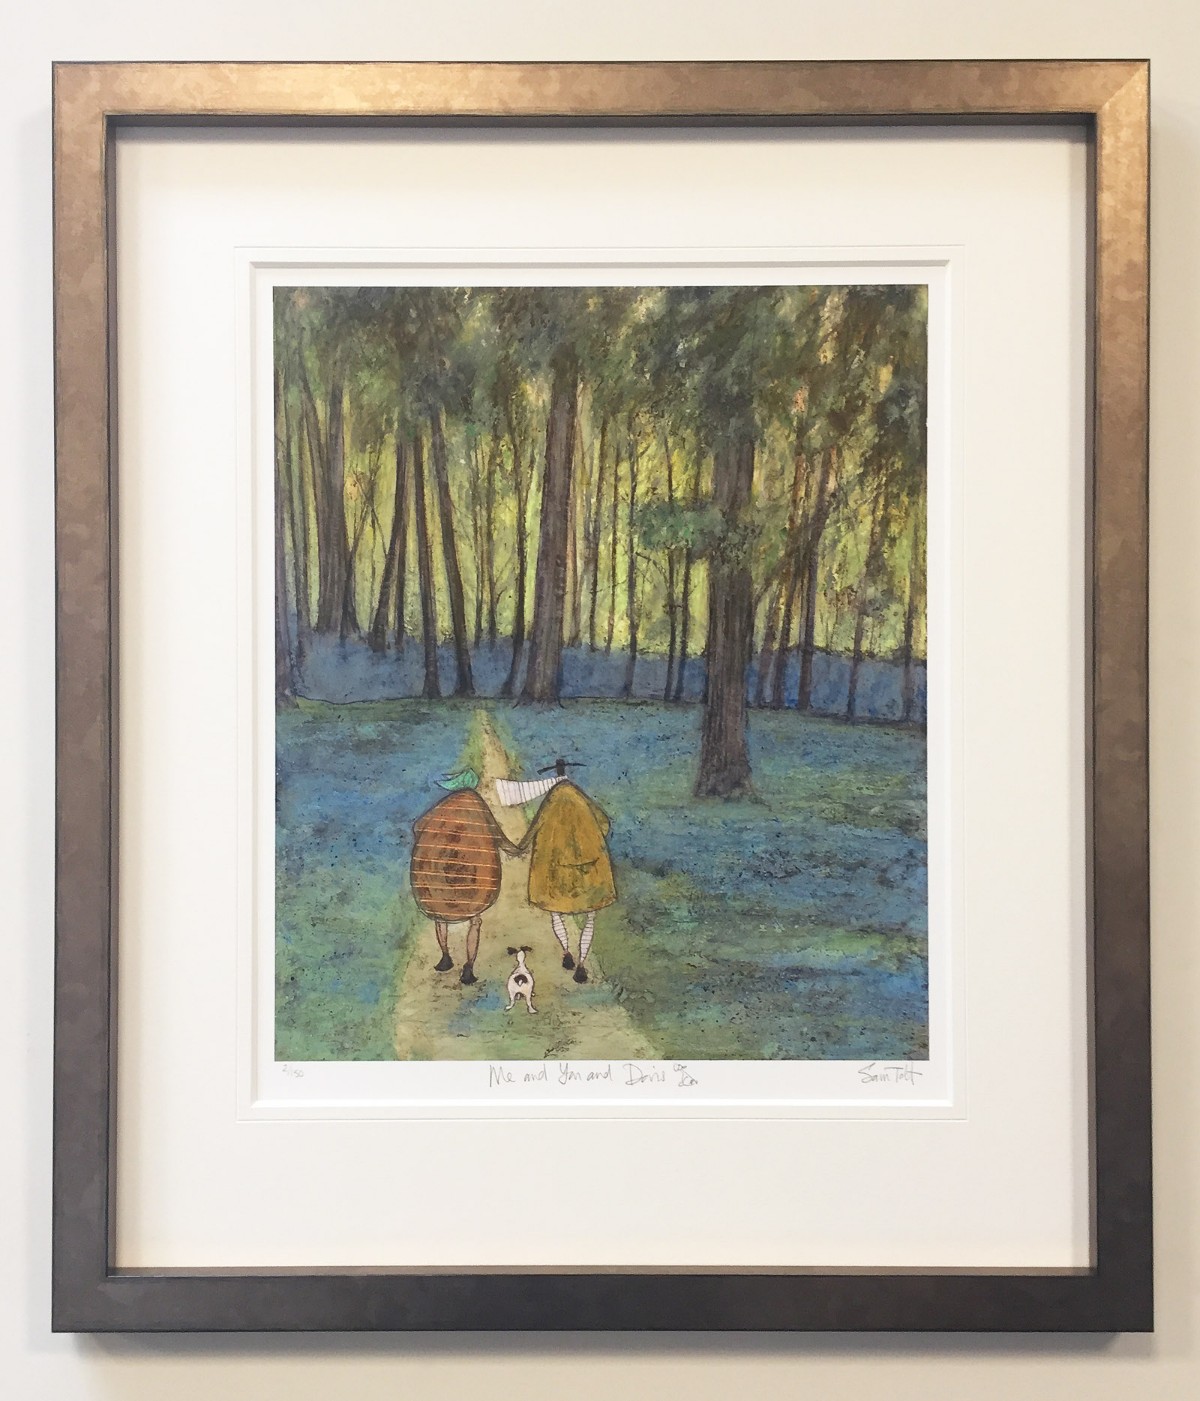 You and Me and Doris 2/150 (Remarque) by Sam Toft